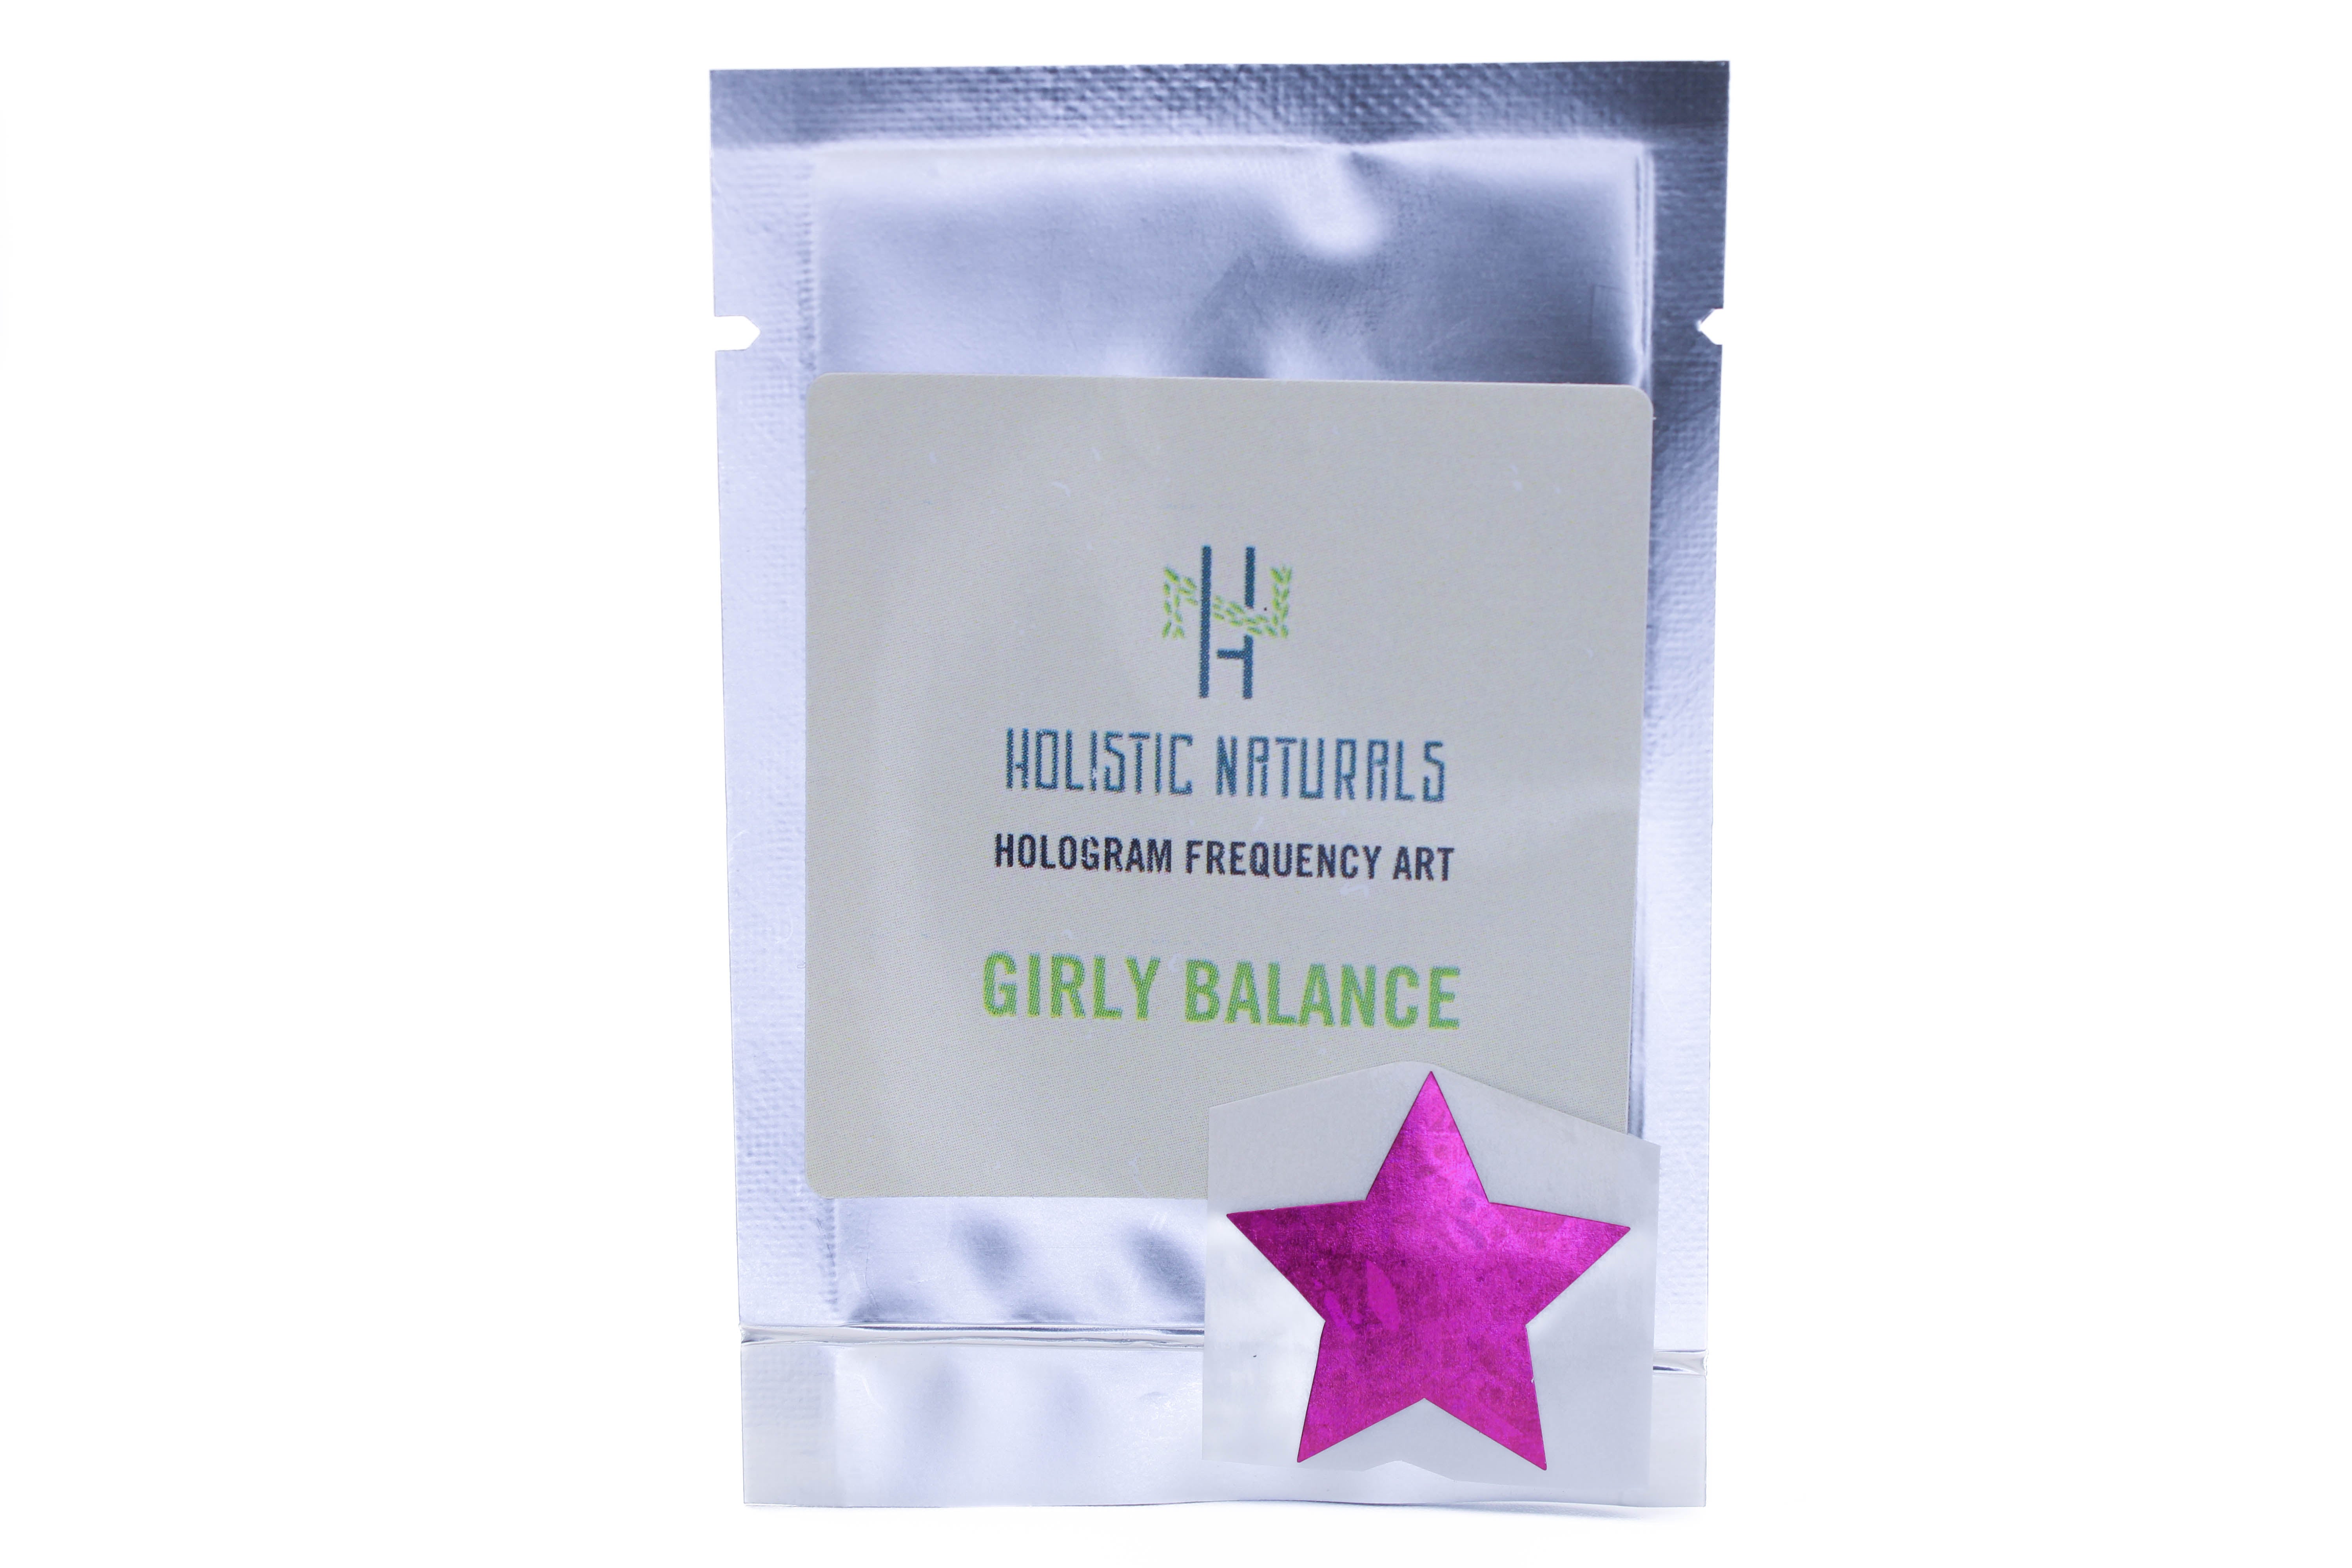 Girly Balance Holographic Frequency Art - 5 Pack